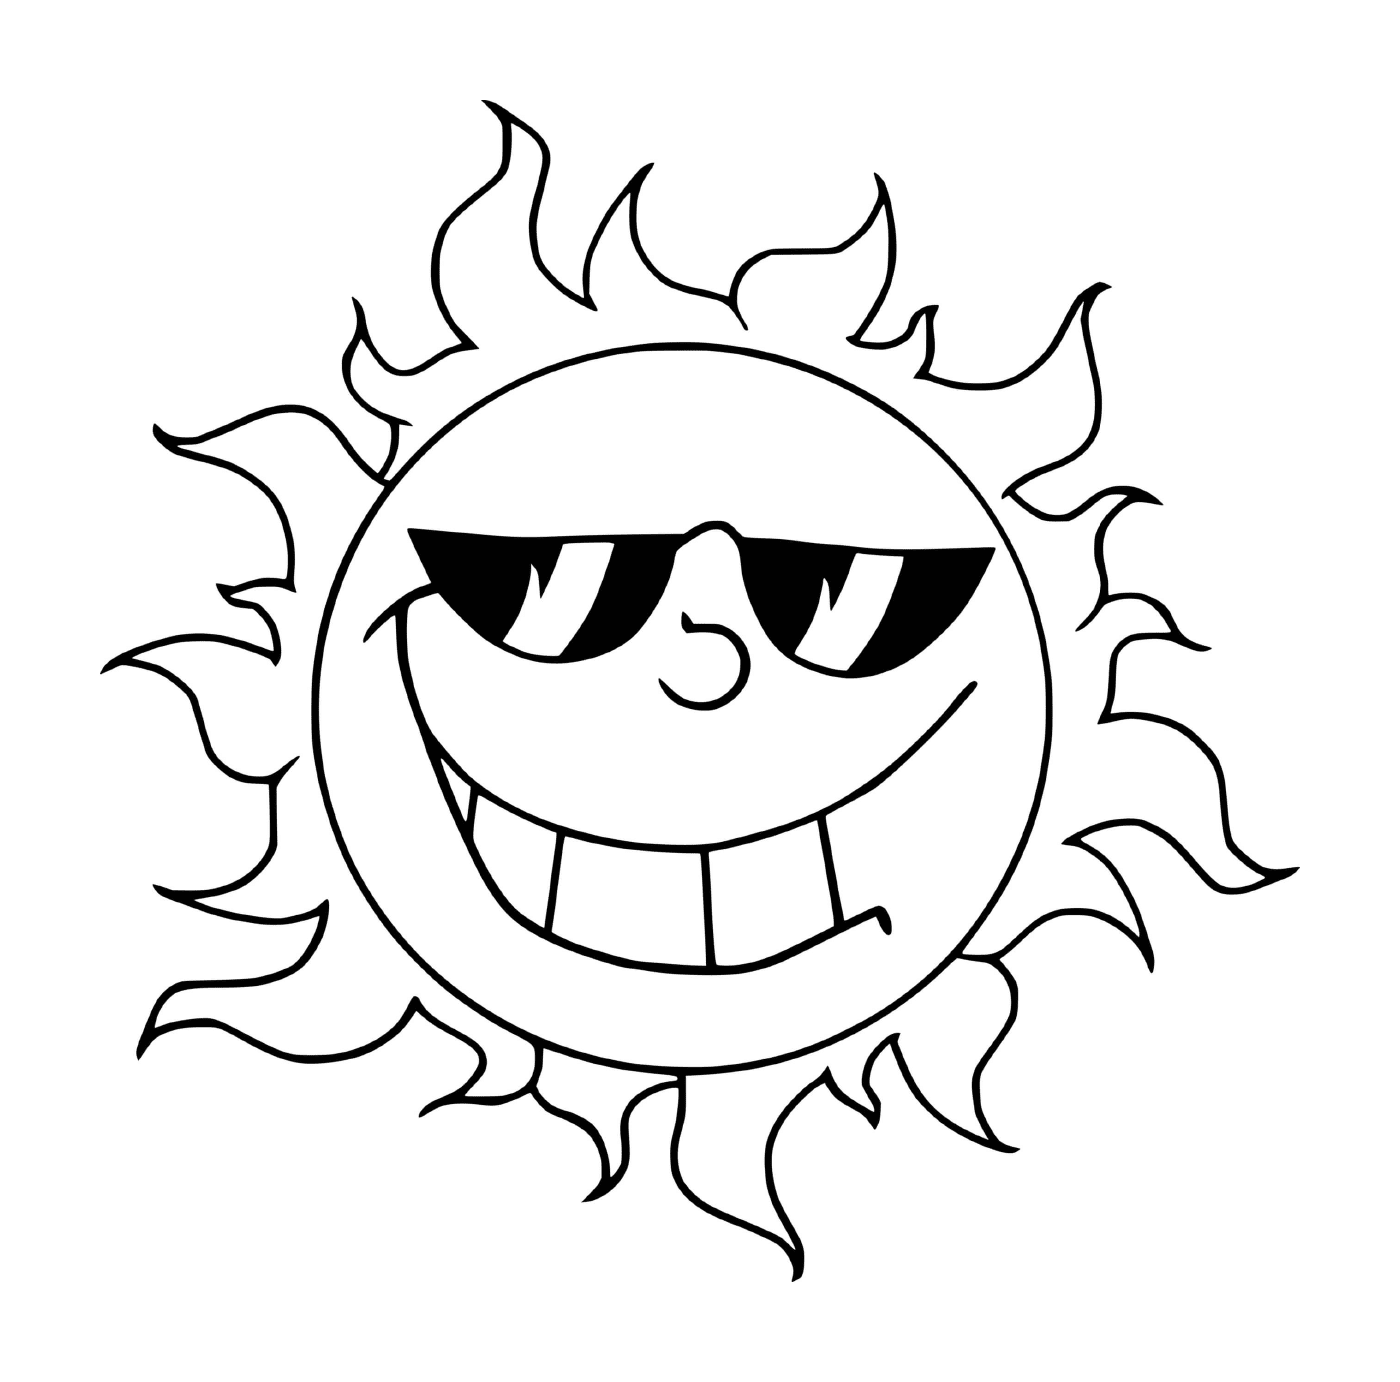  Cool sun with glasses 